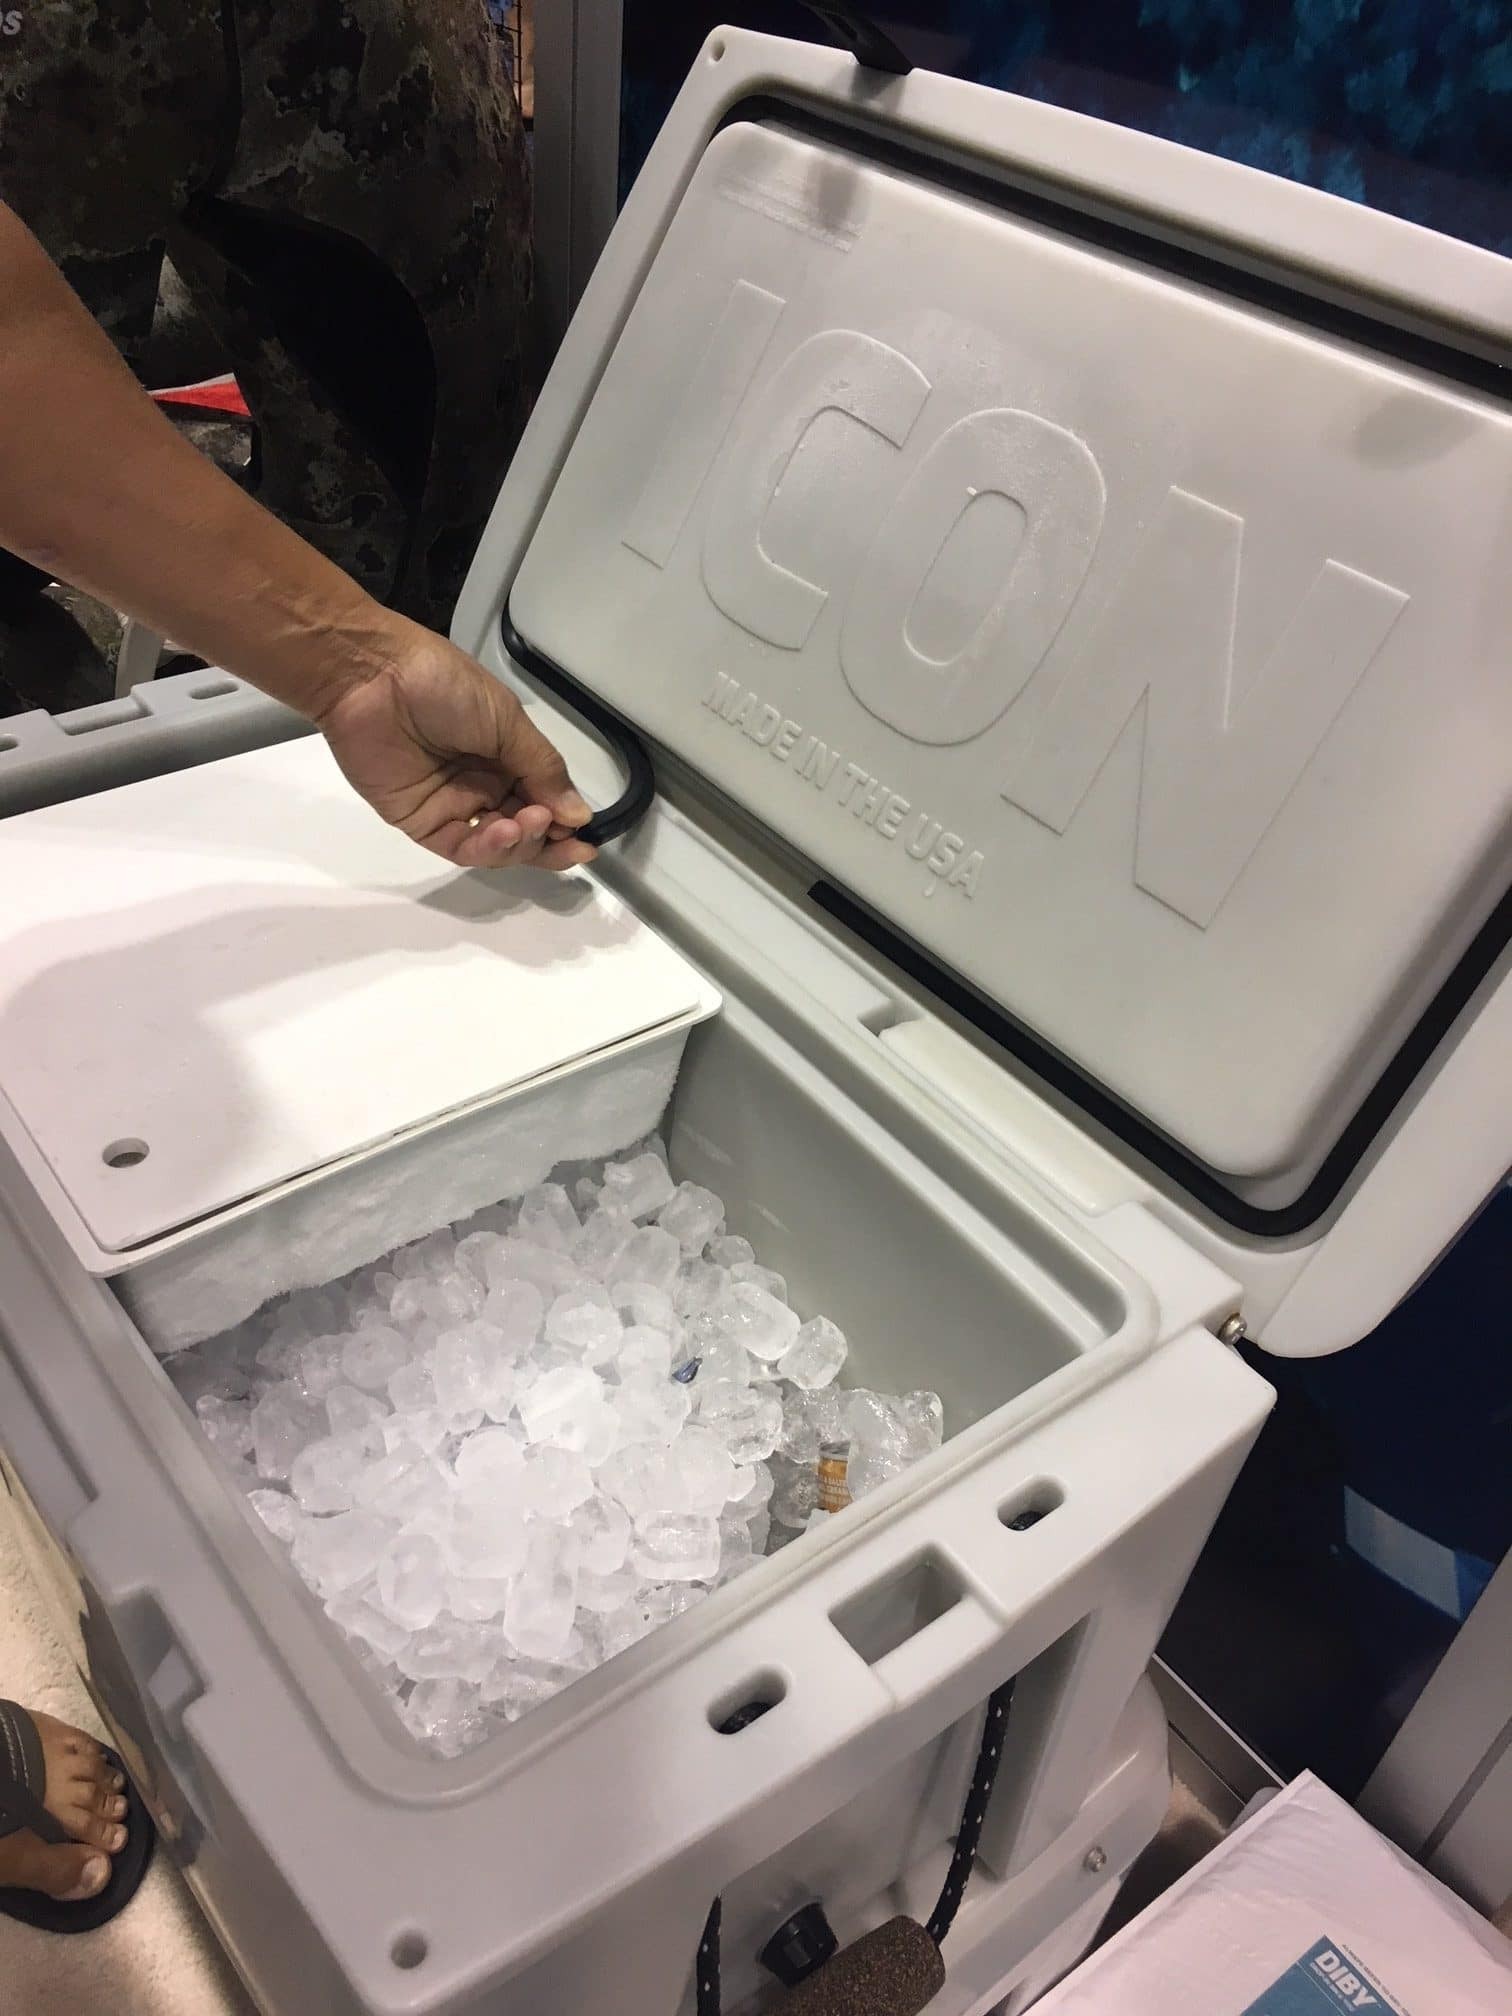 The Icon cooler features a removable gasket seal for easy cleaning and the patented Diby fridge sleeve.